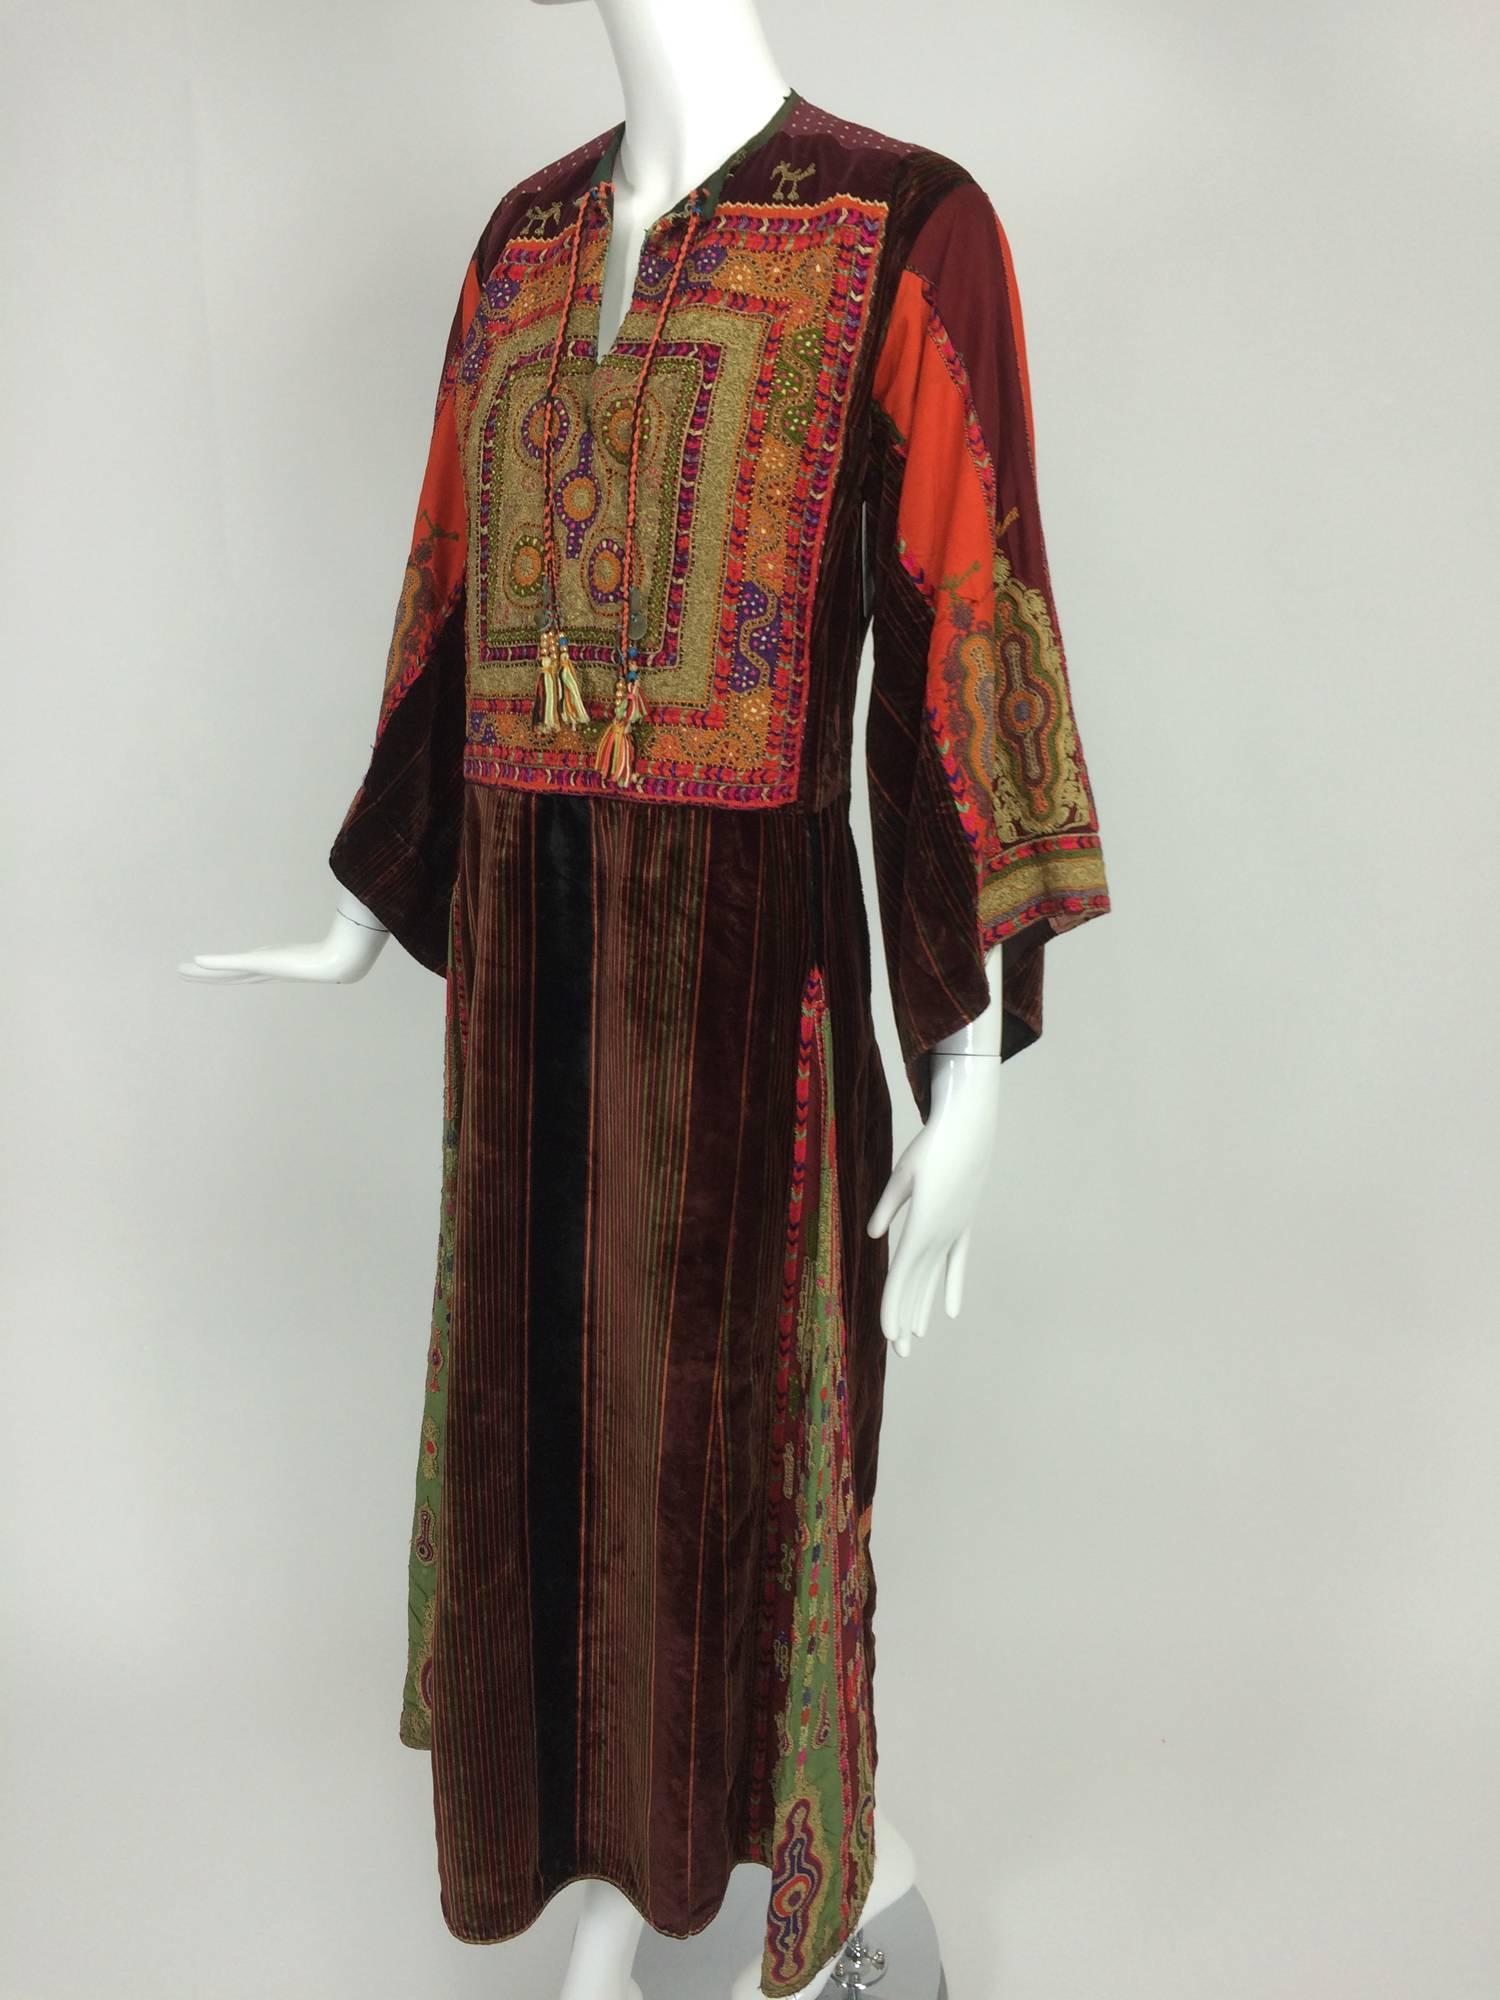 Women's Mid 20th C. Palestinian traditional embroidered velvet robe 